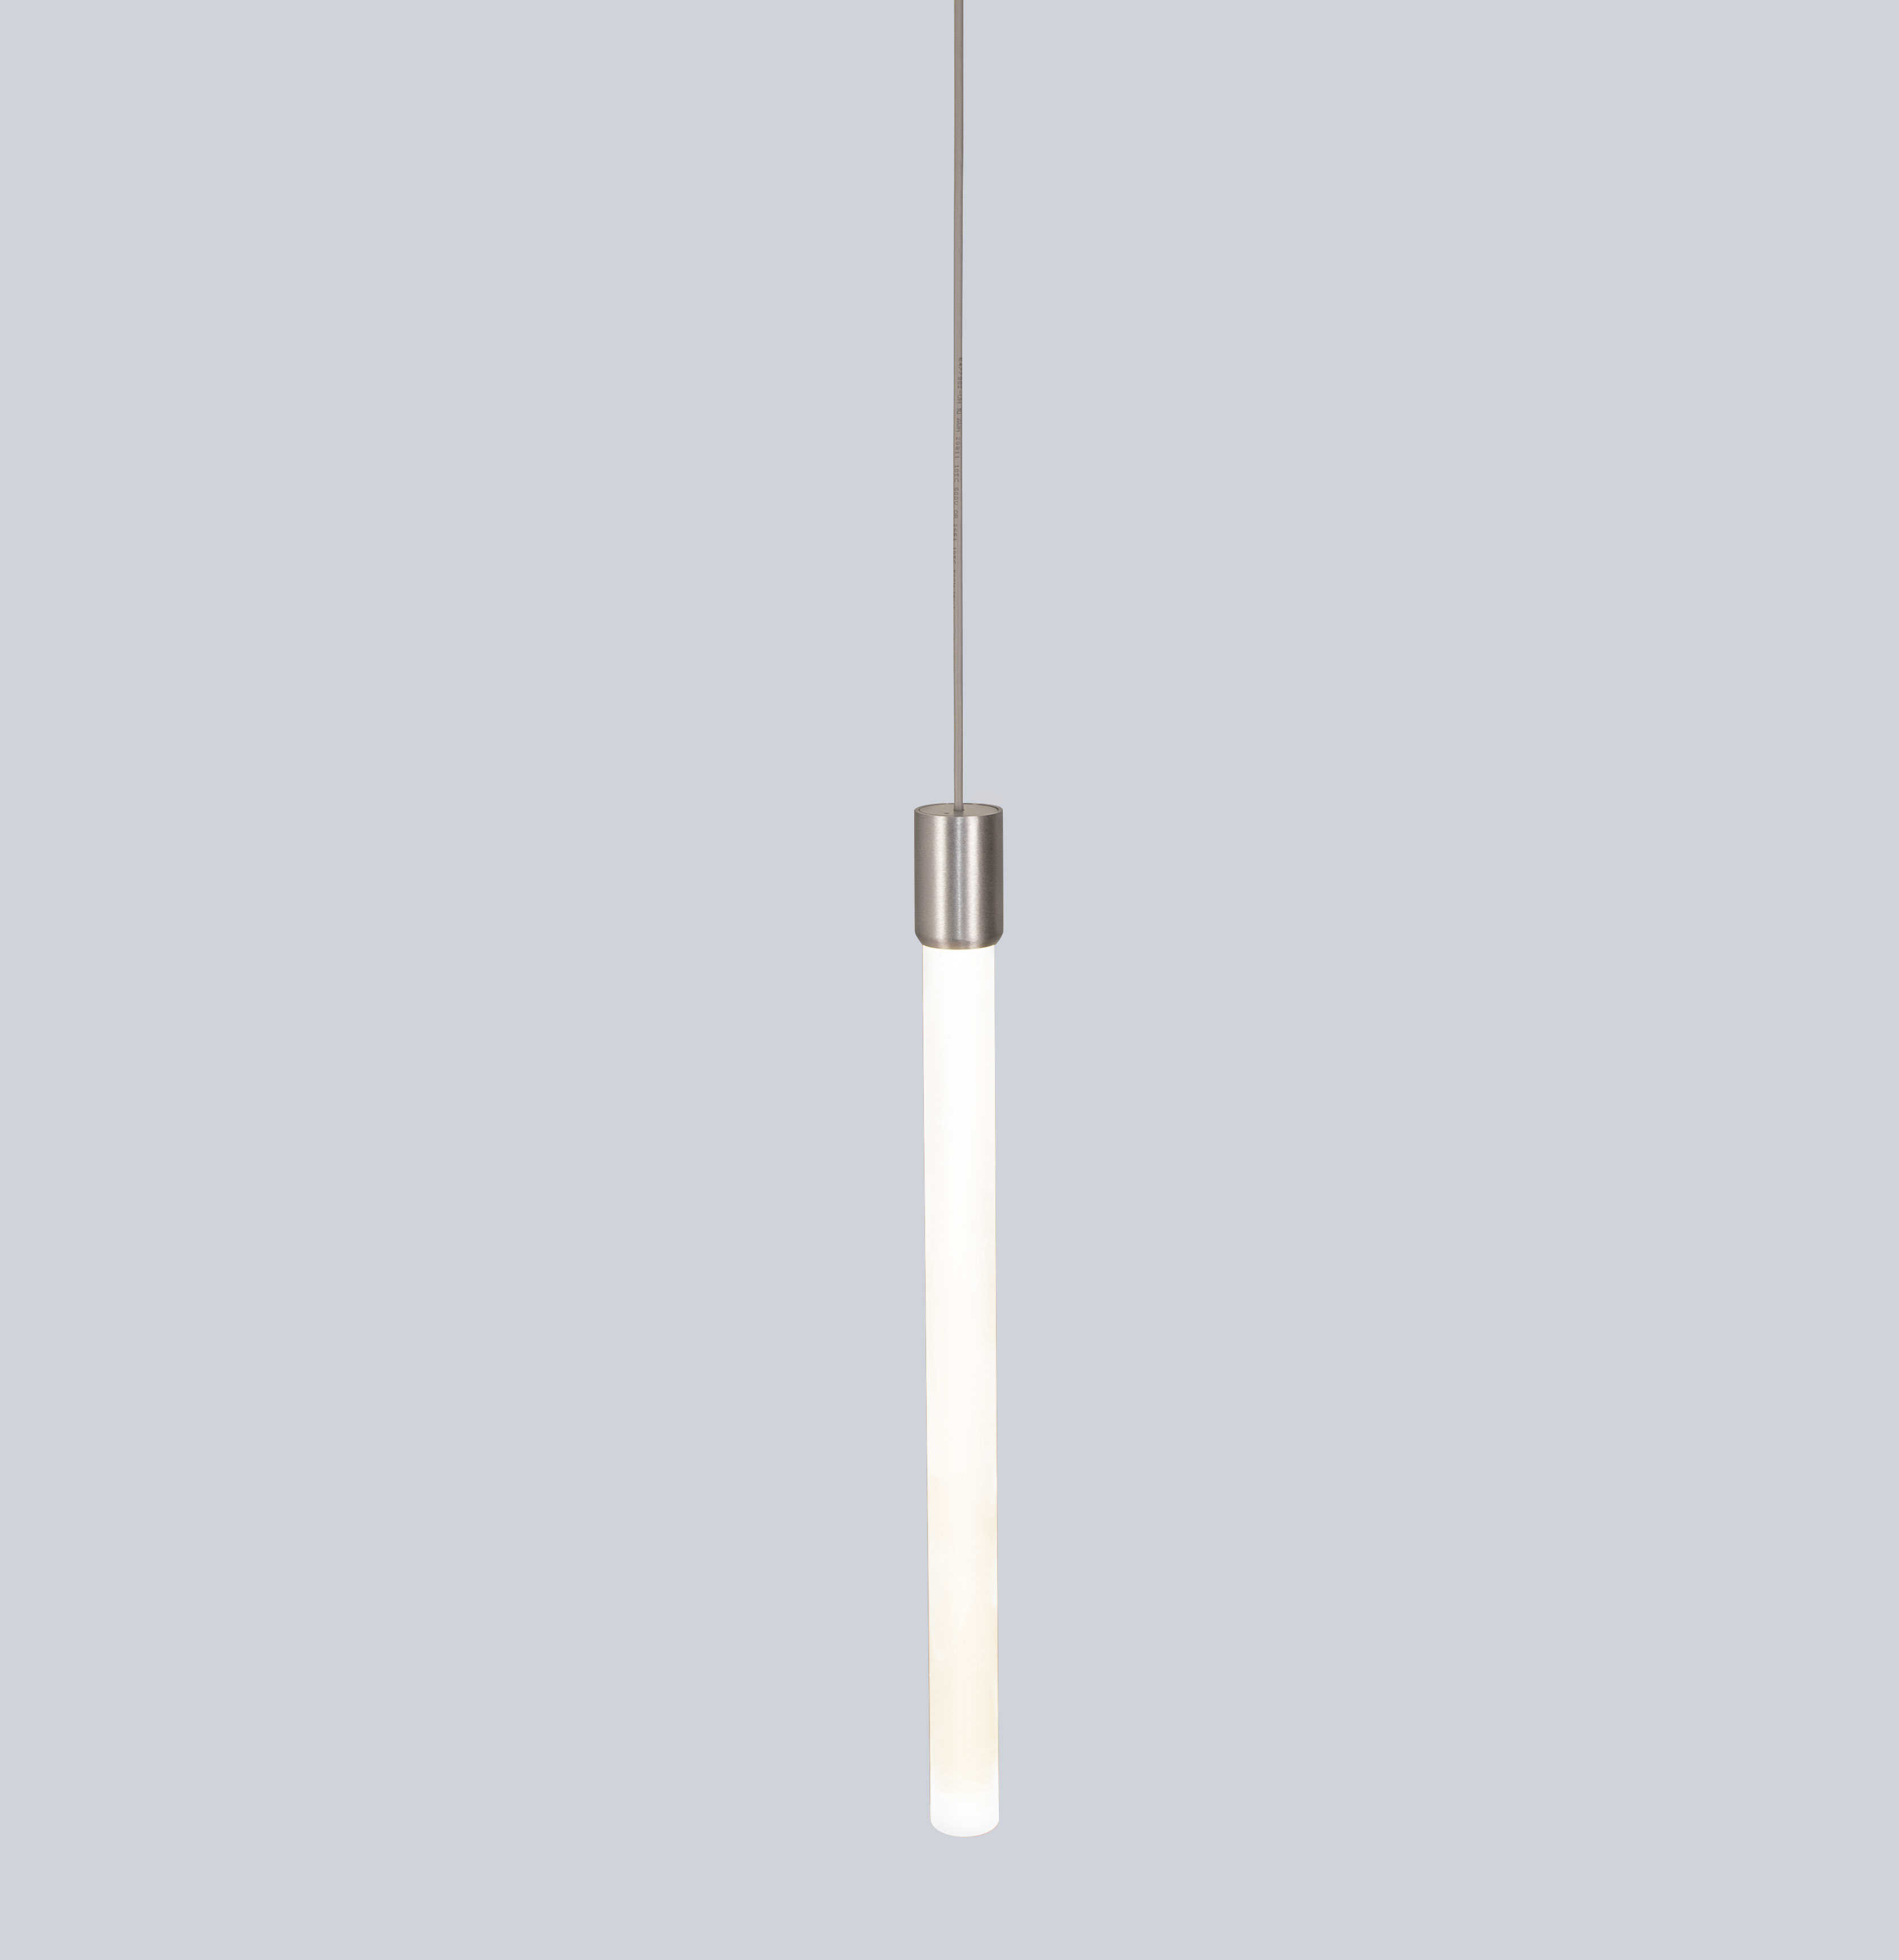 Theo collection includes one-foot and two-foot LED rod light pendants and single rod and double rod lighting wall sconces